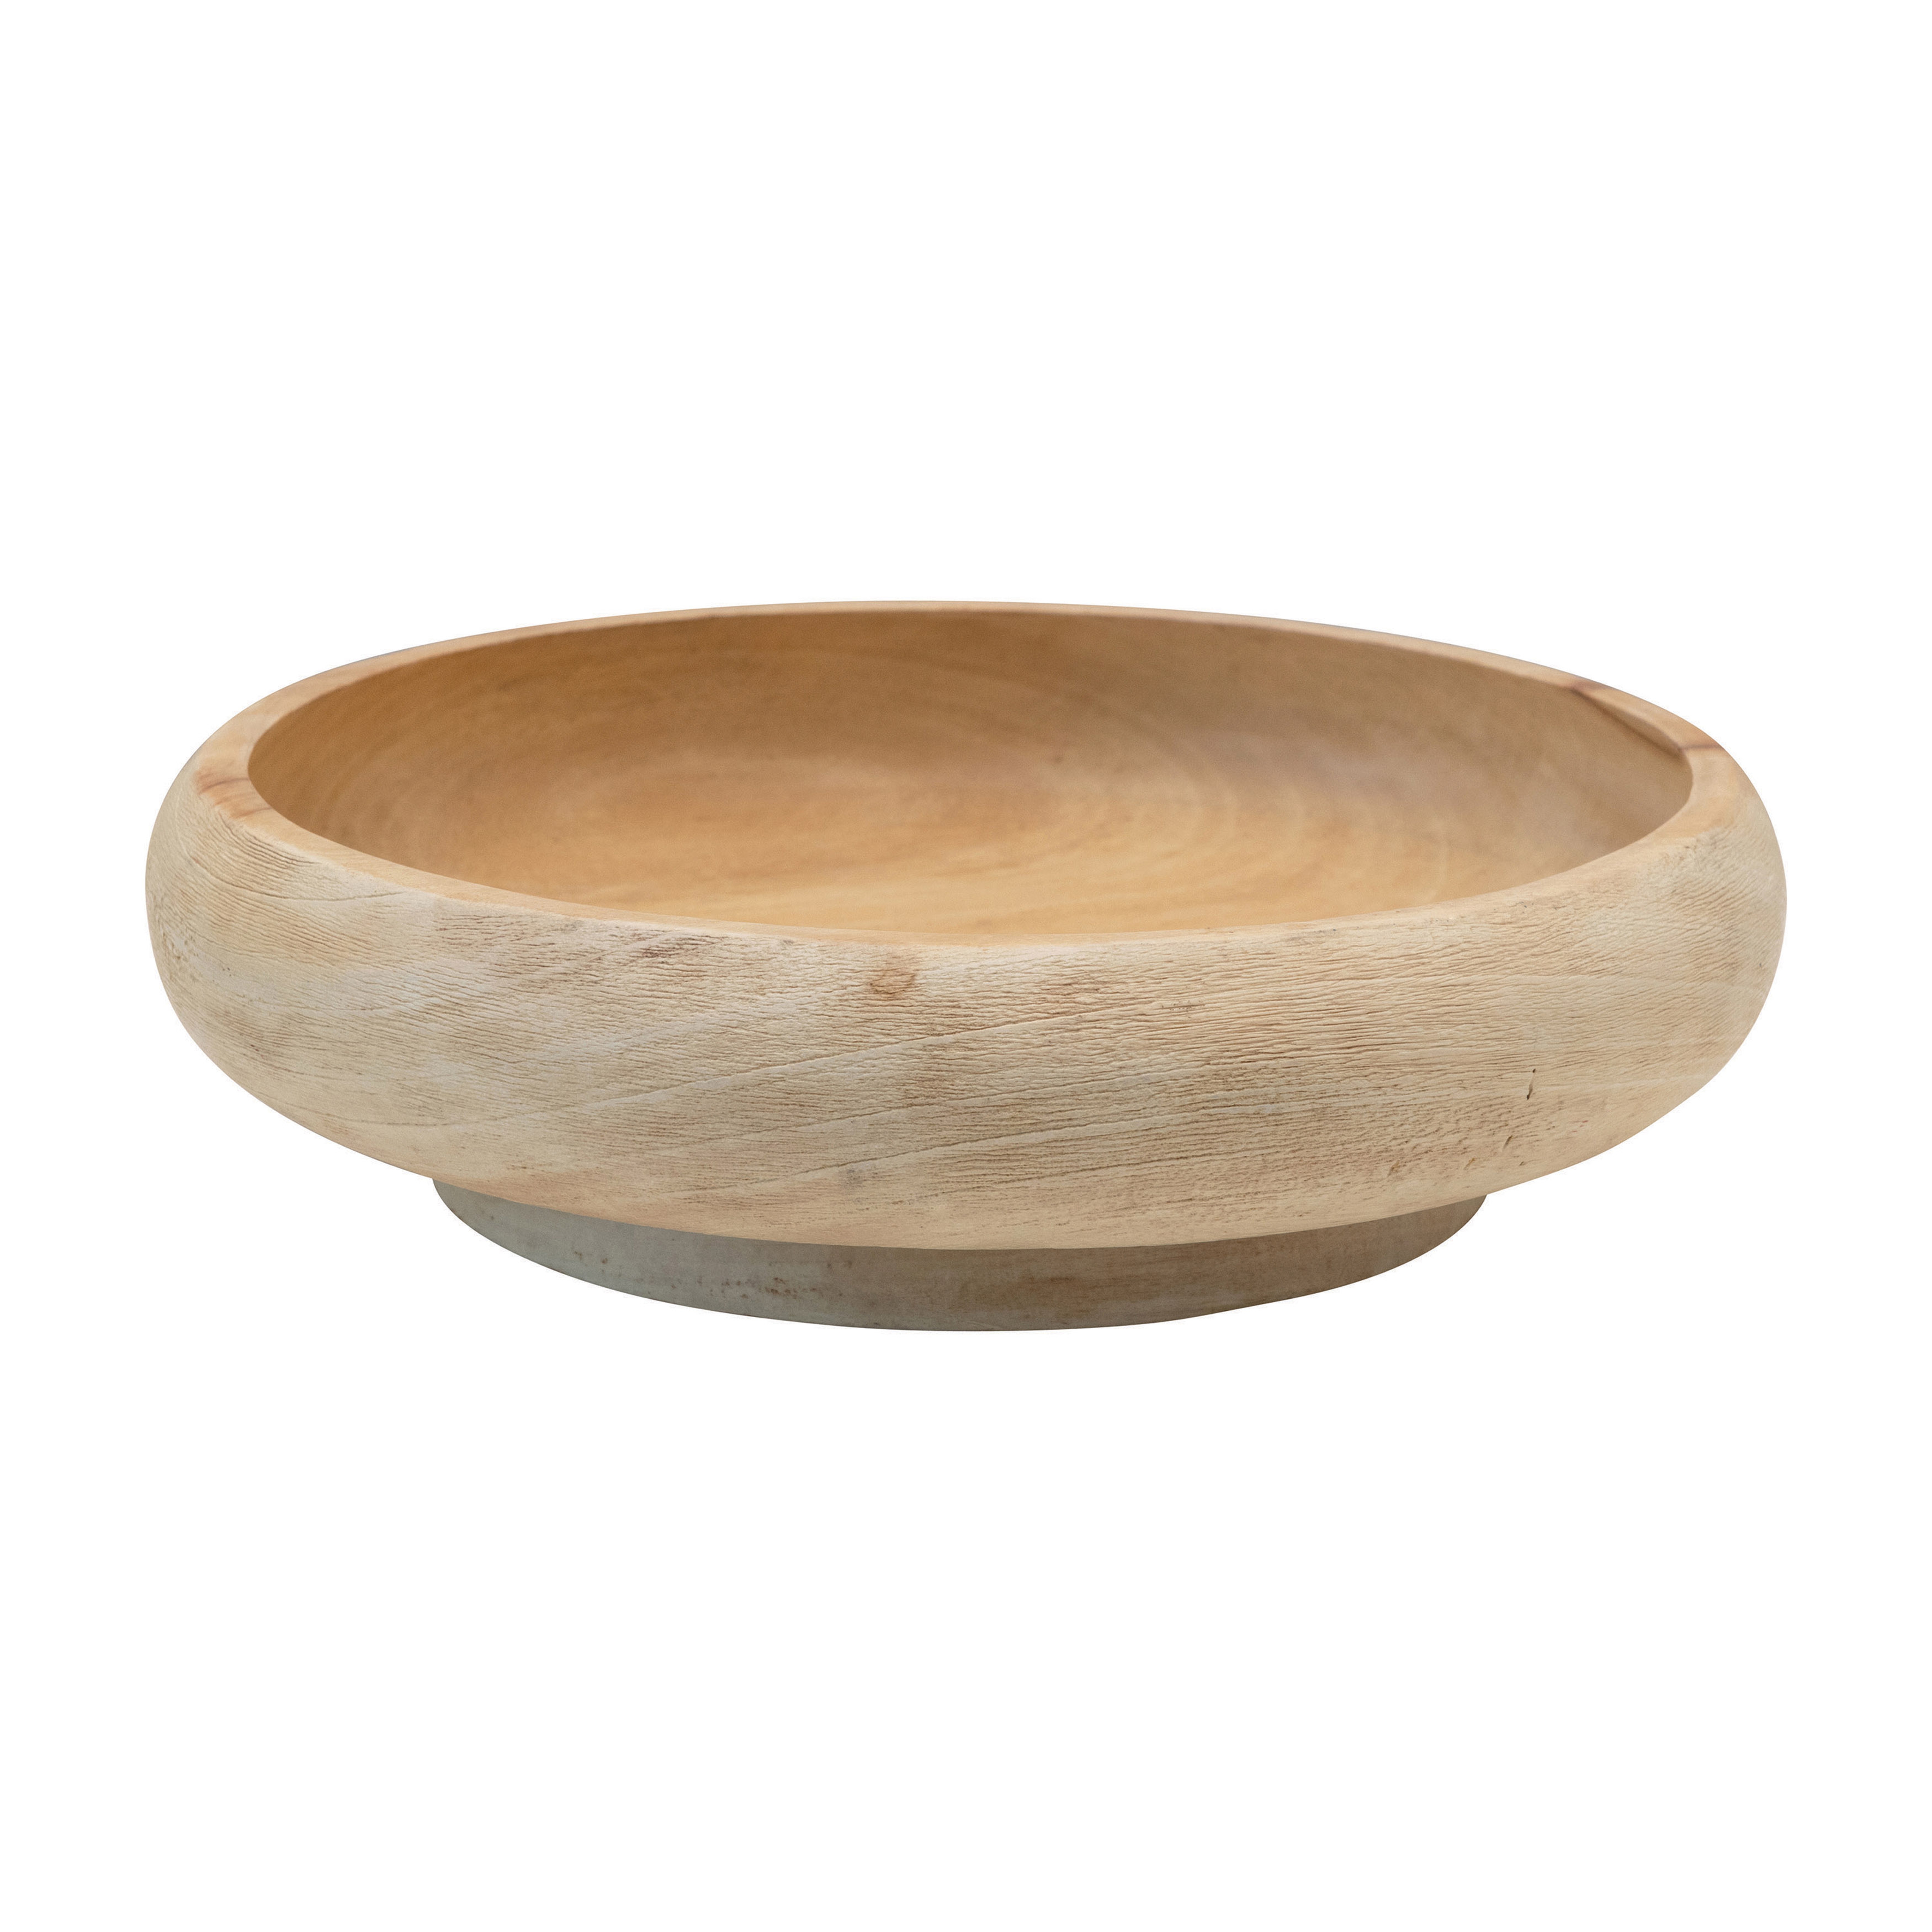 Mango Wood Bowl, Combed & Bleached - Nomad Home